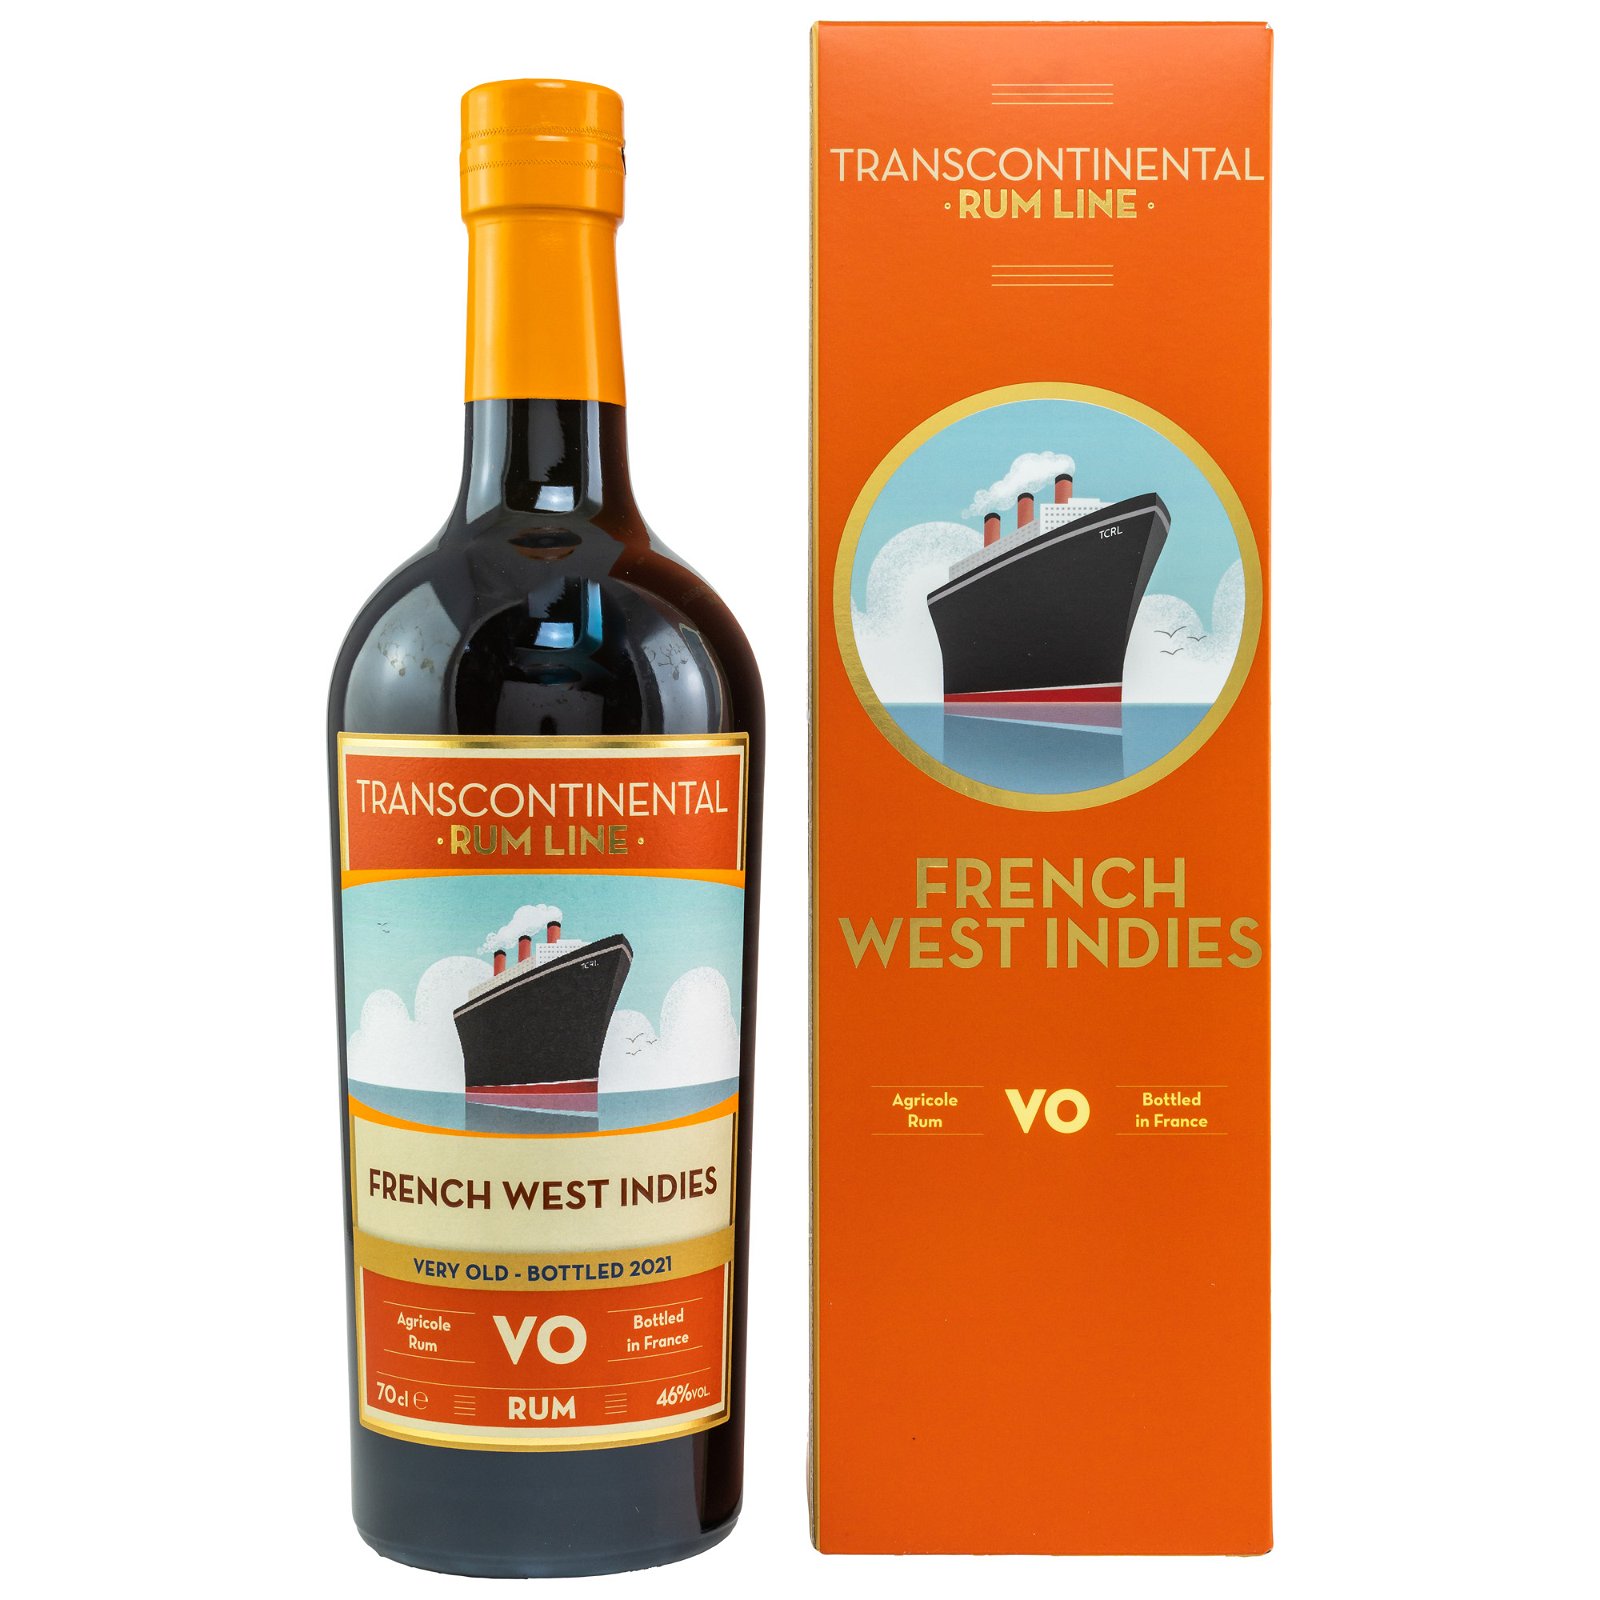 French West Indies 2021 VO Agricole Rum Transcontinental Rum Line